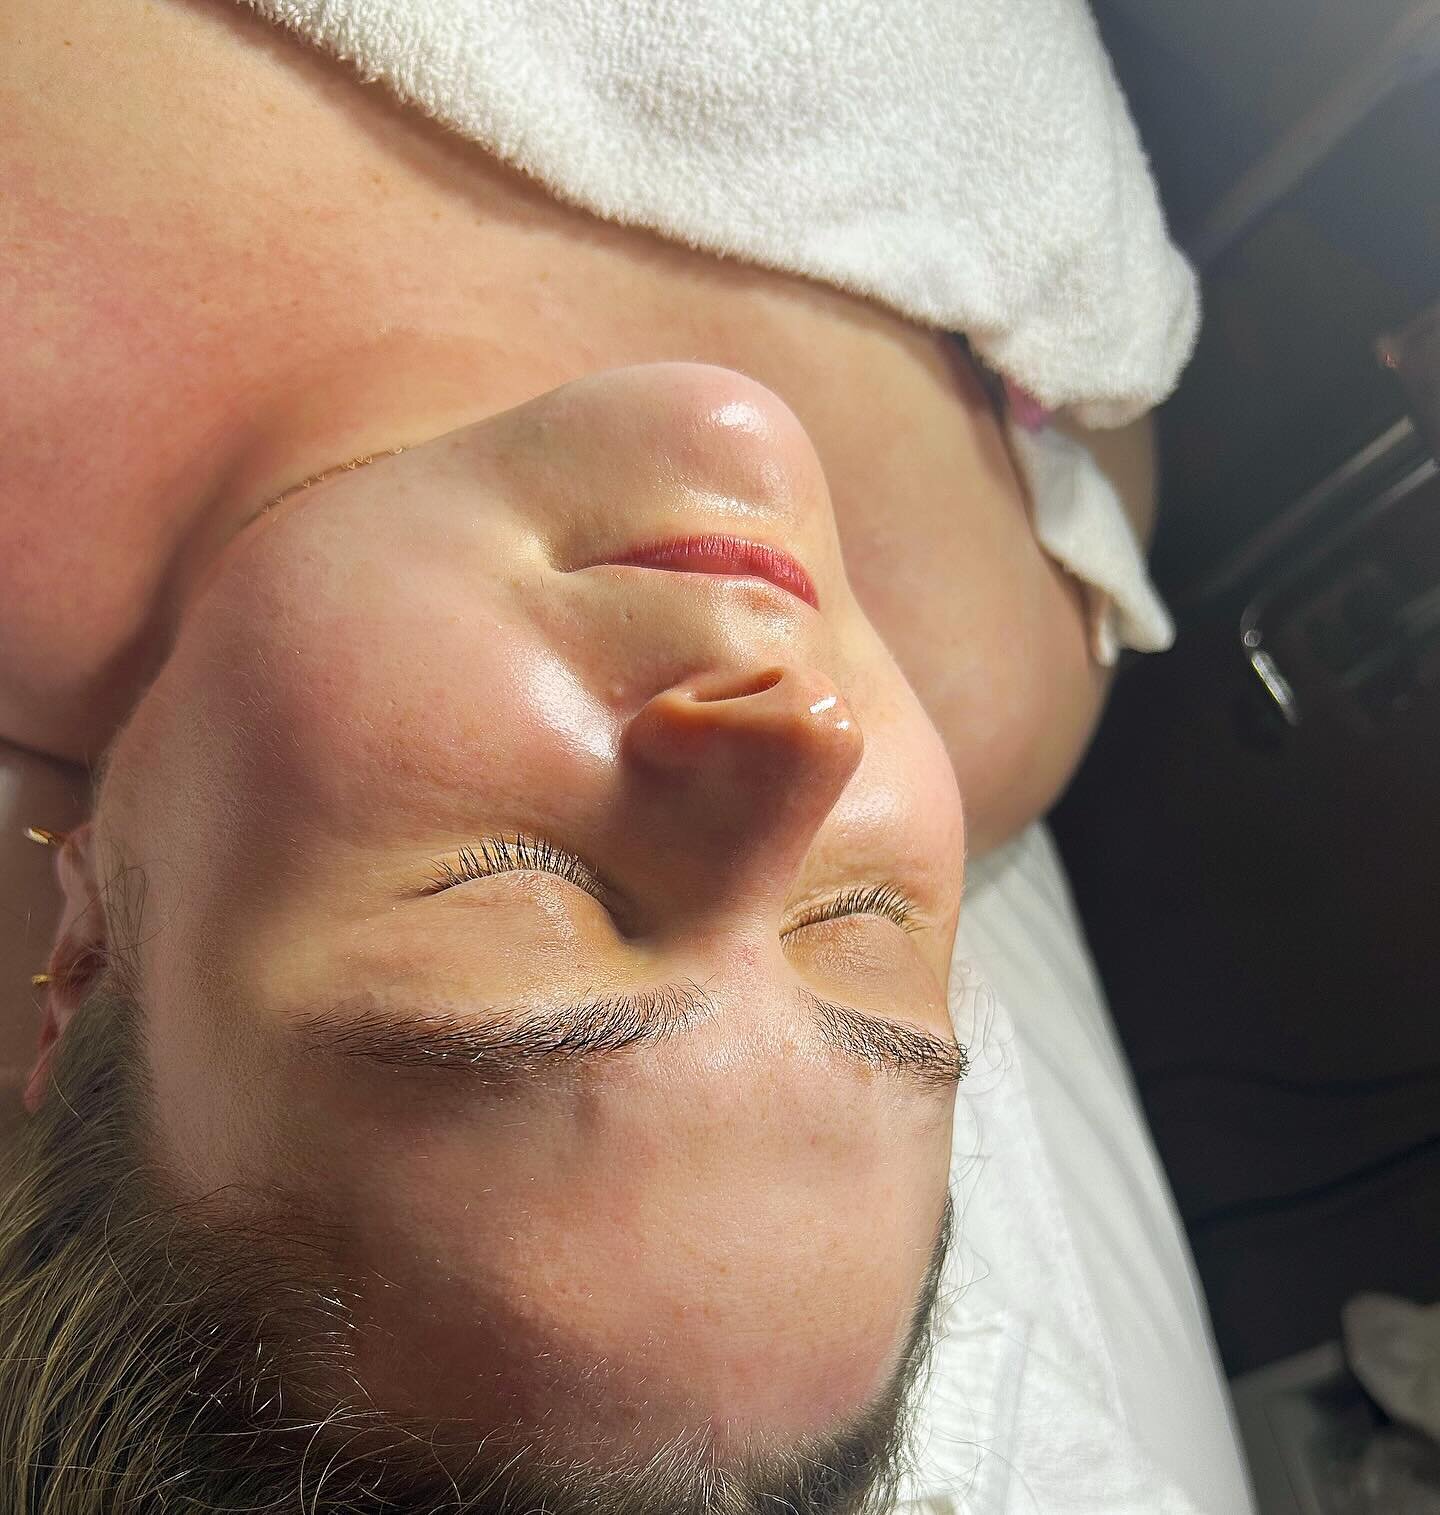 The Glow is REAL ✨ 
For the first facial we did the basic B facial. I wanted to really get to know her skin. We deep cleaned those pores and exfoliated very lightly. Included extracting and finished with a juicy hydration mask✨
Come see me to get you